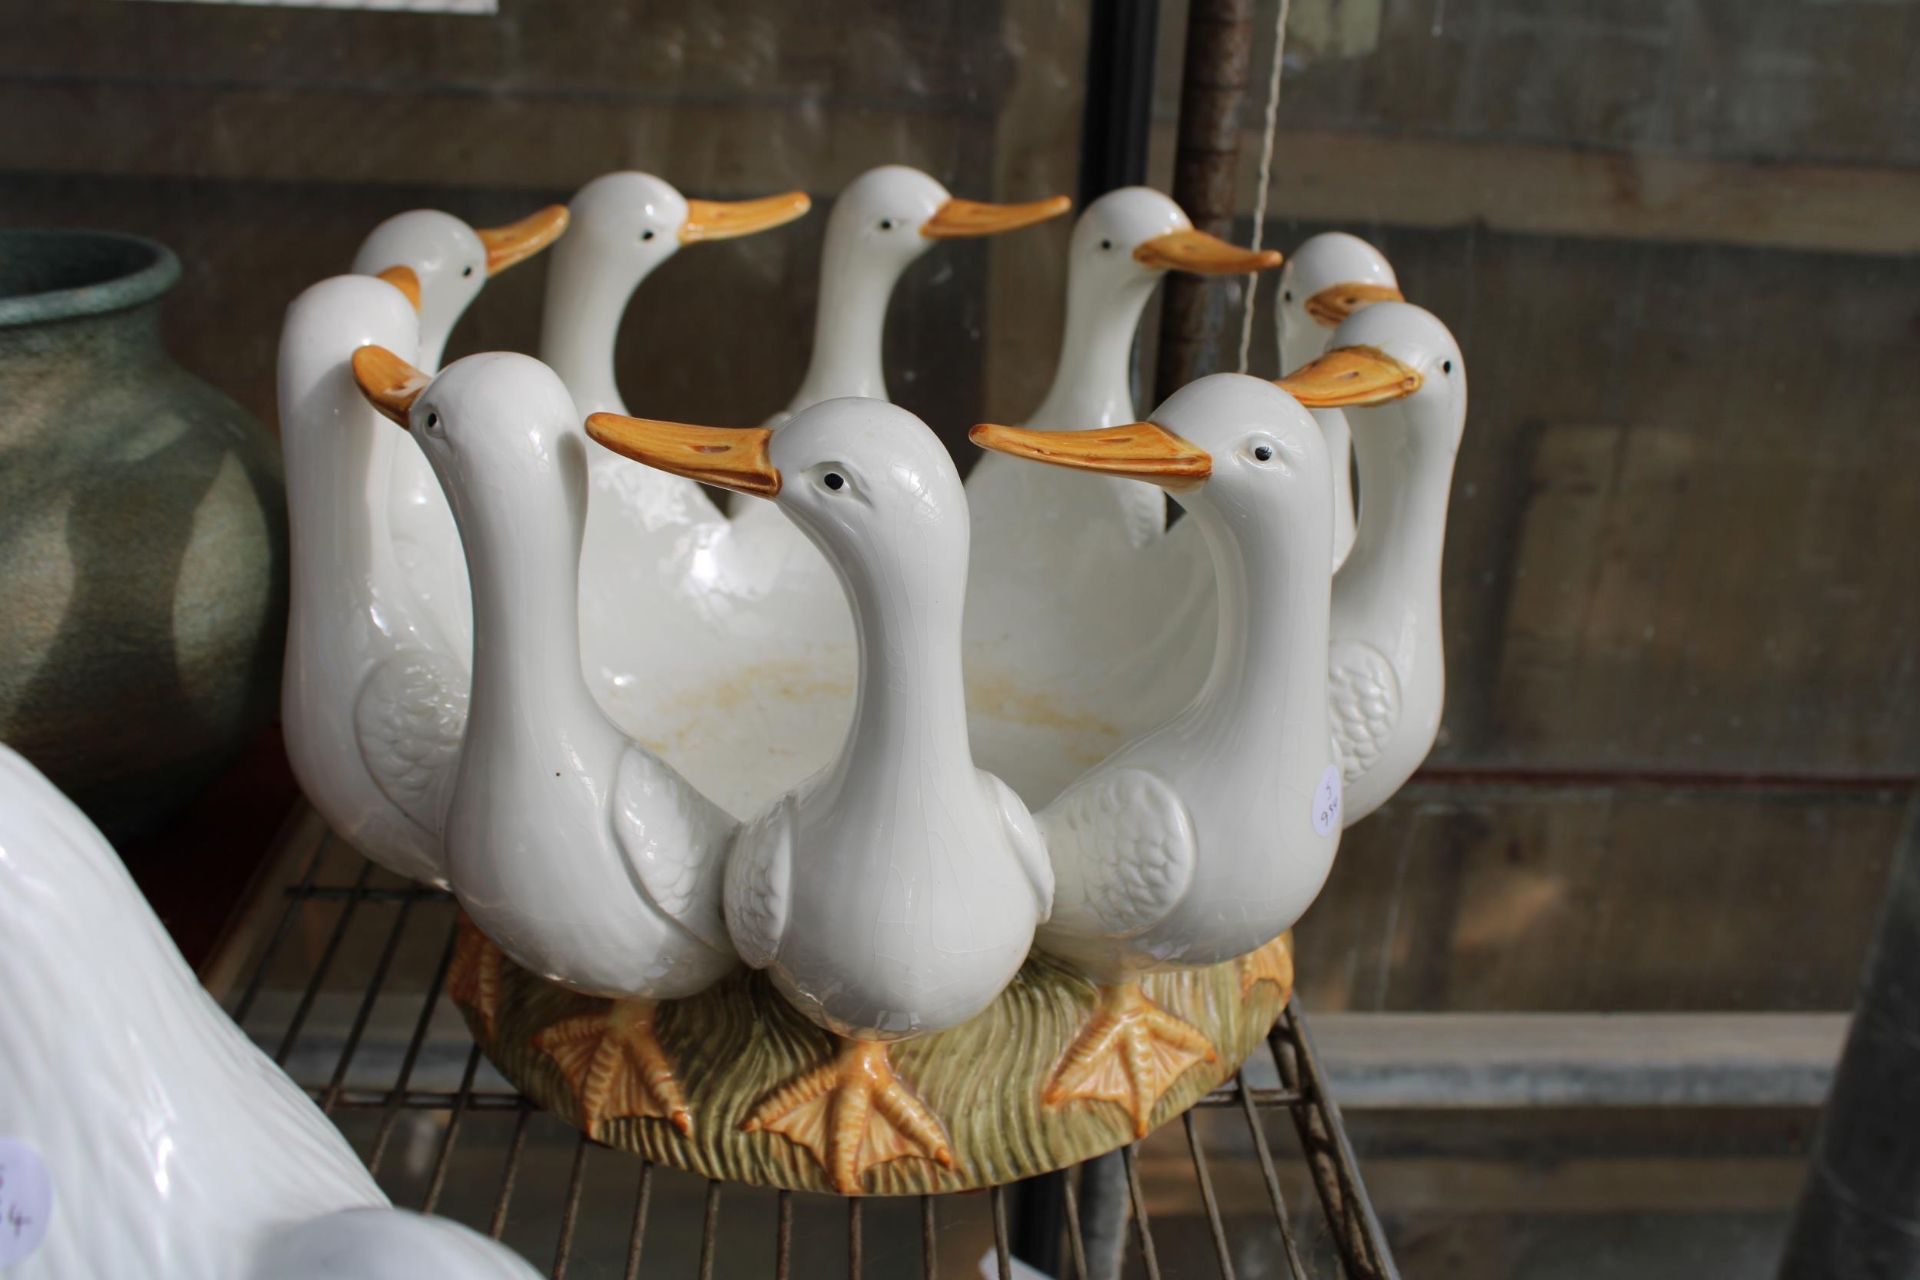 A LARGE CERAMIC DUCK BOWL AND TWO CERAMIC CHICKENS - Image 2 of 2